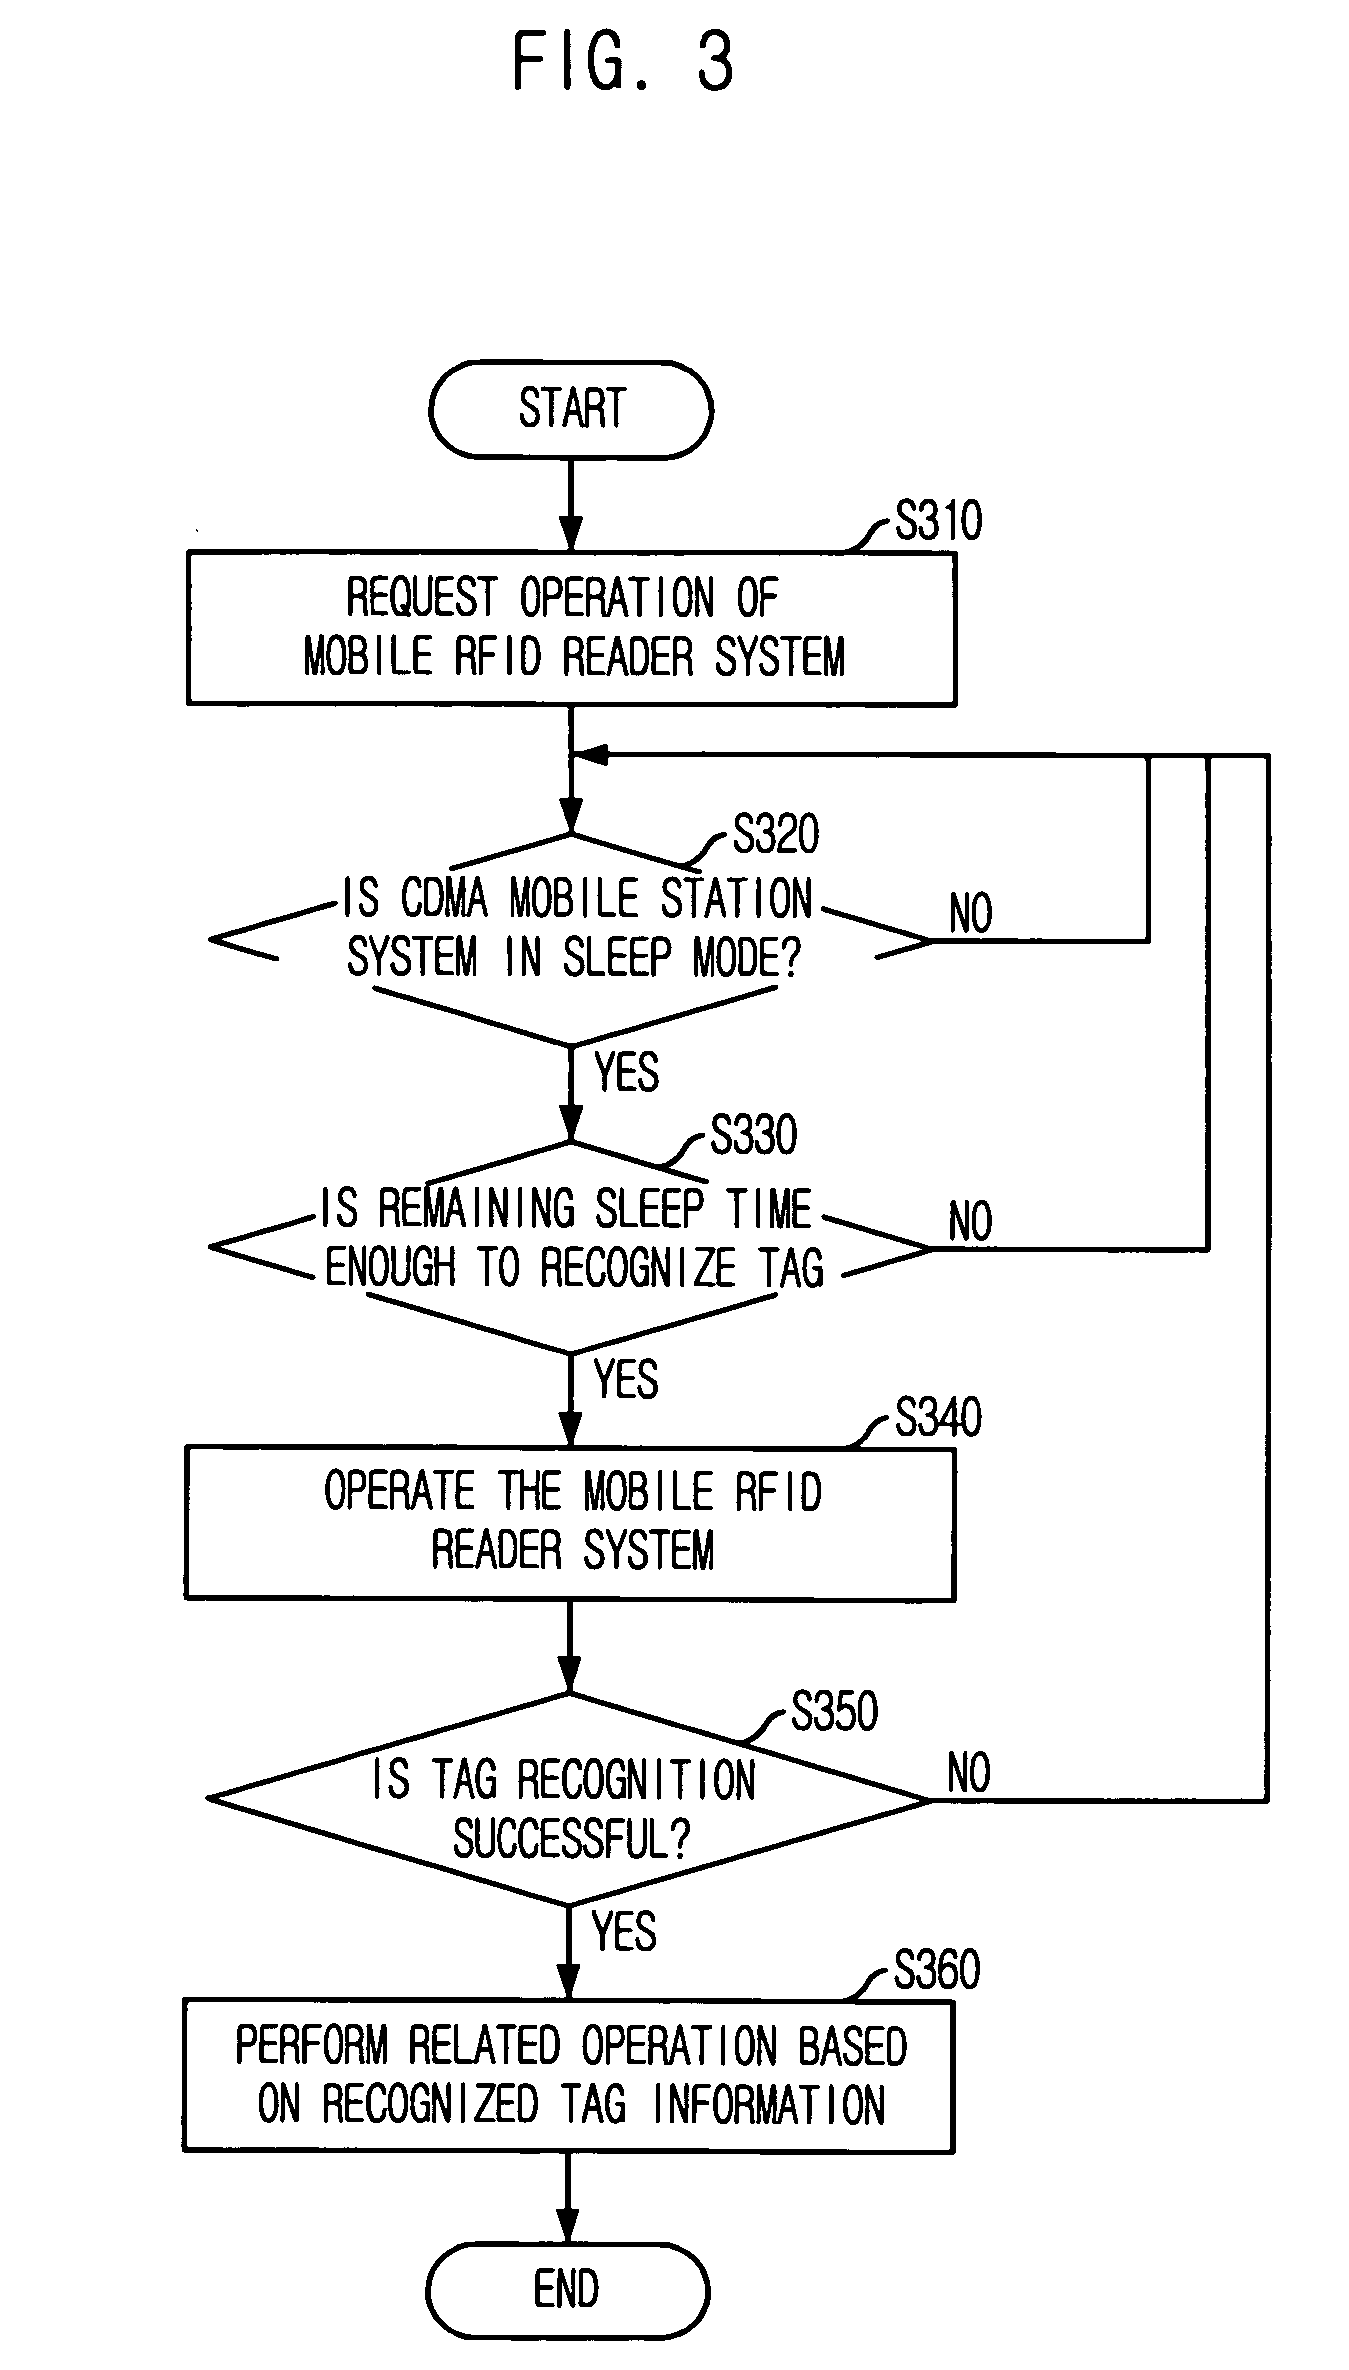 Method and apparatus for sharing portable terminal in CDMA system and mobile RFID system